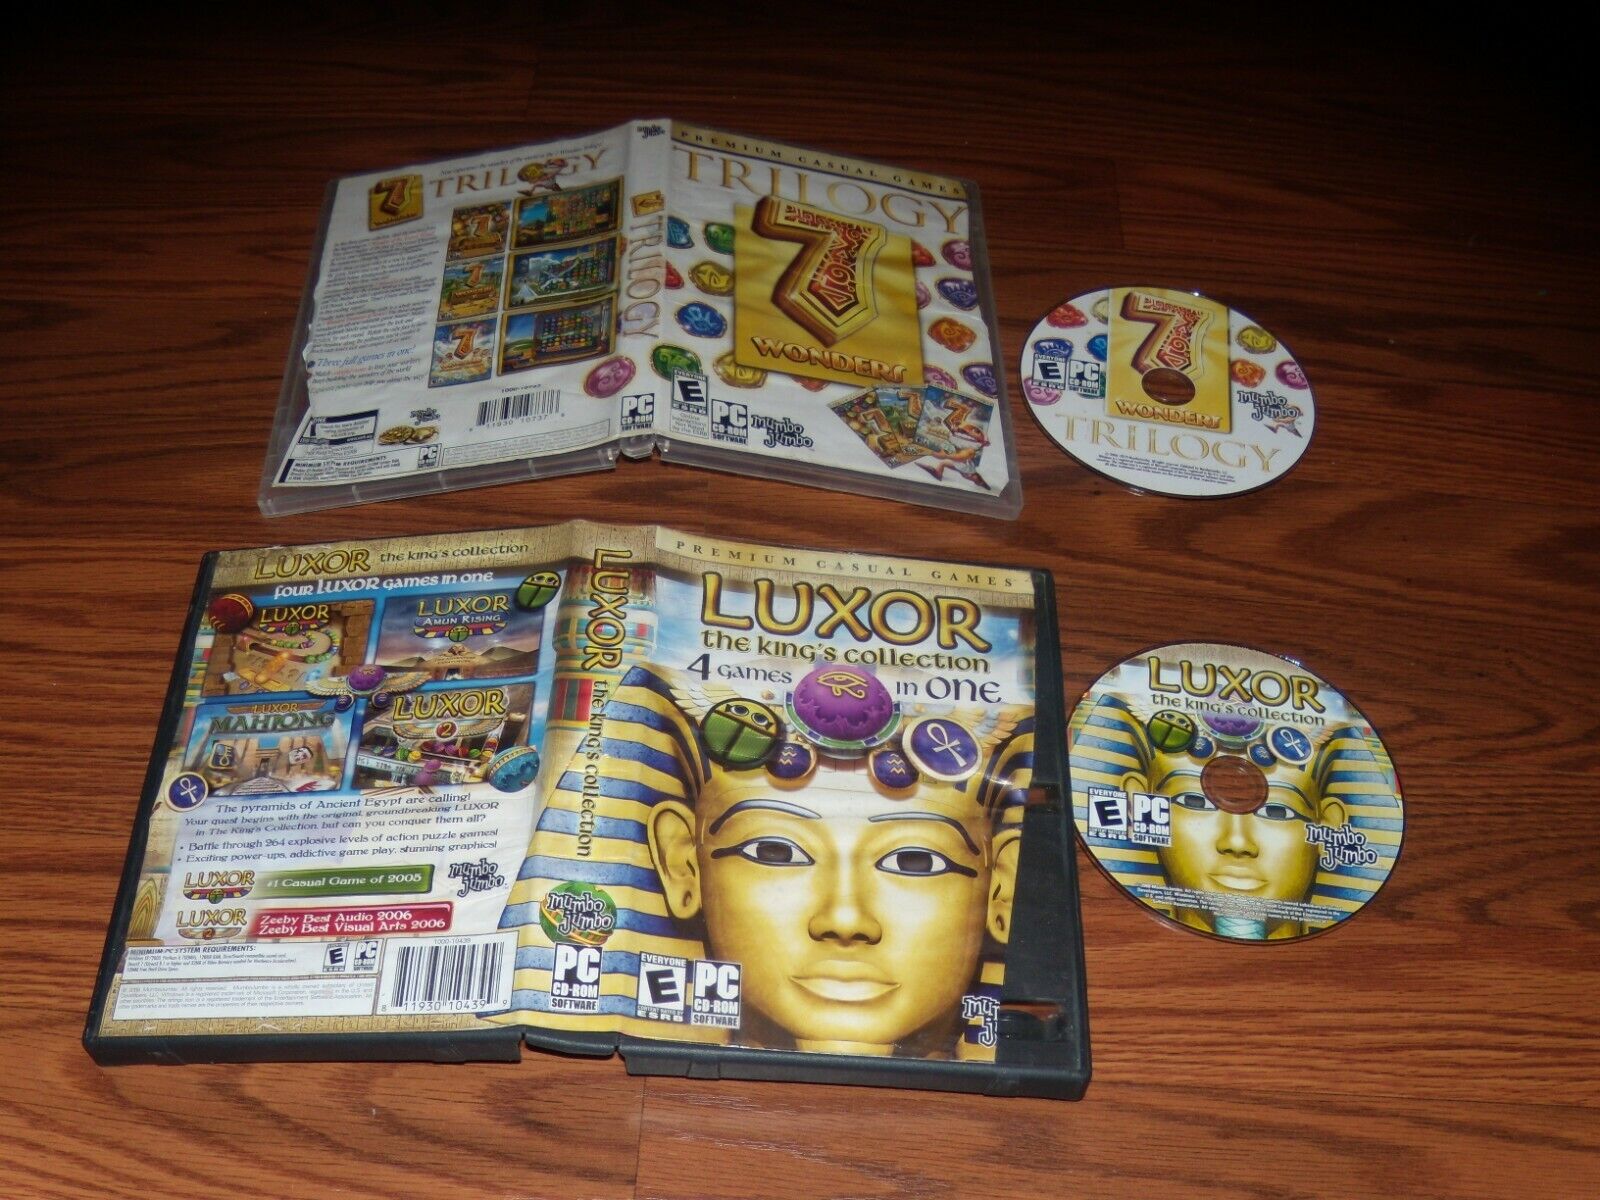 2 PC Games: Trilogy 7 Wonders and Luxor The Kings\' Collection 4 Games in One